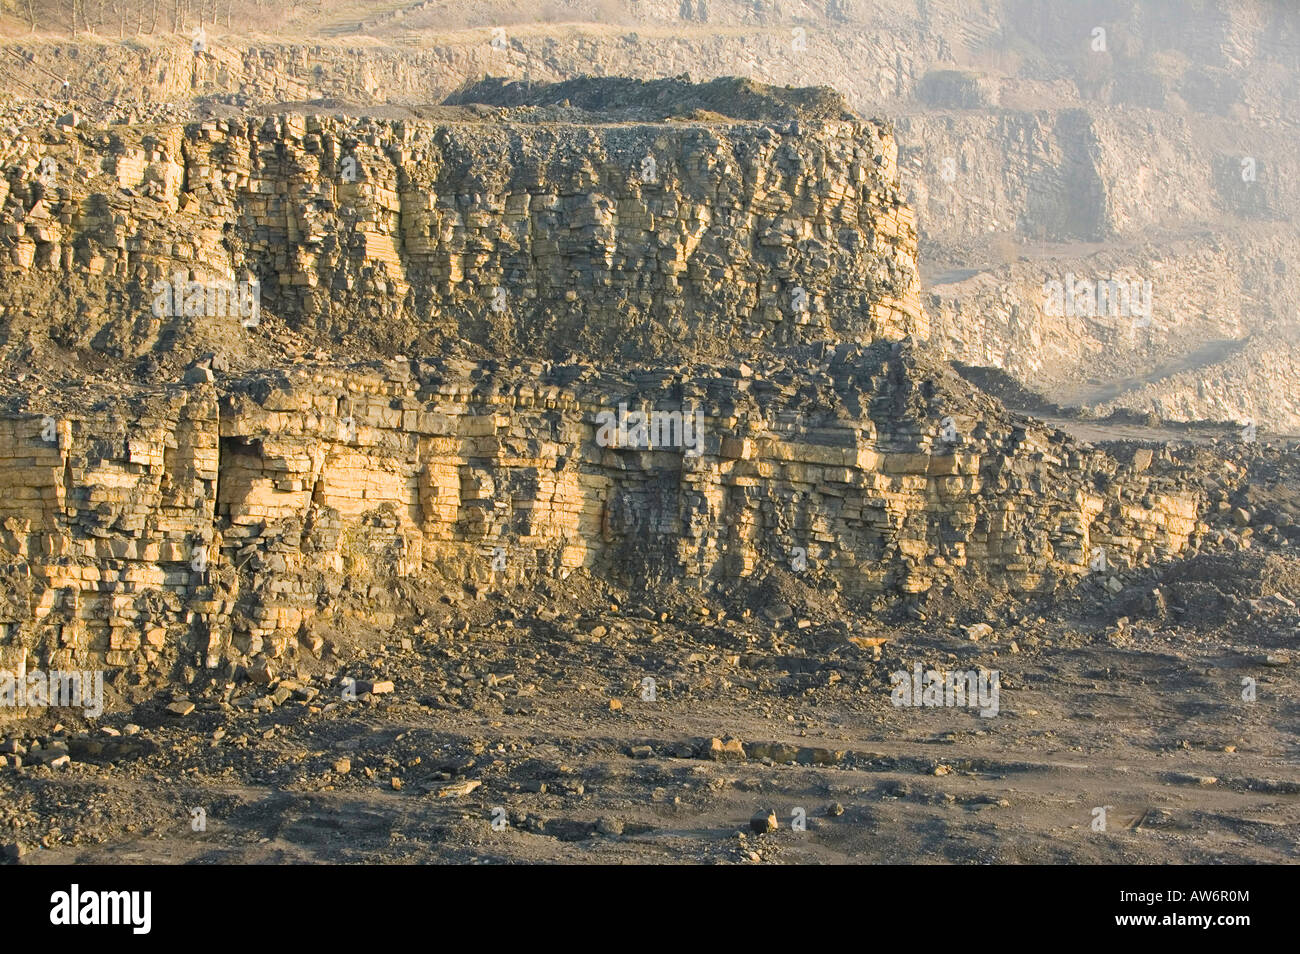 Cement Quarry High Resolution Stock Photography and Images - Alamy